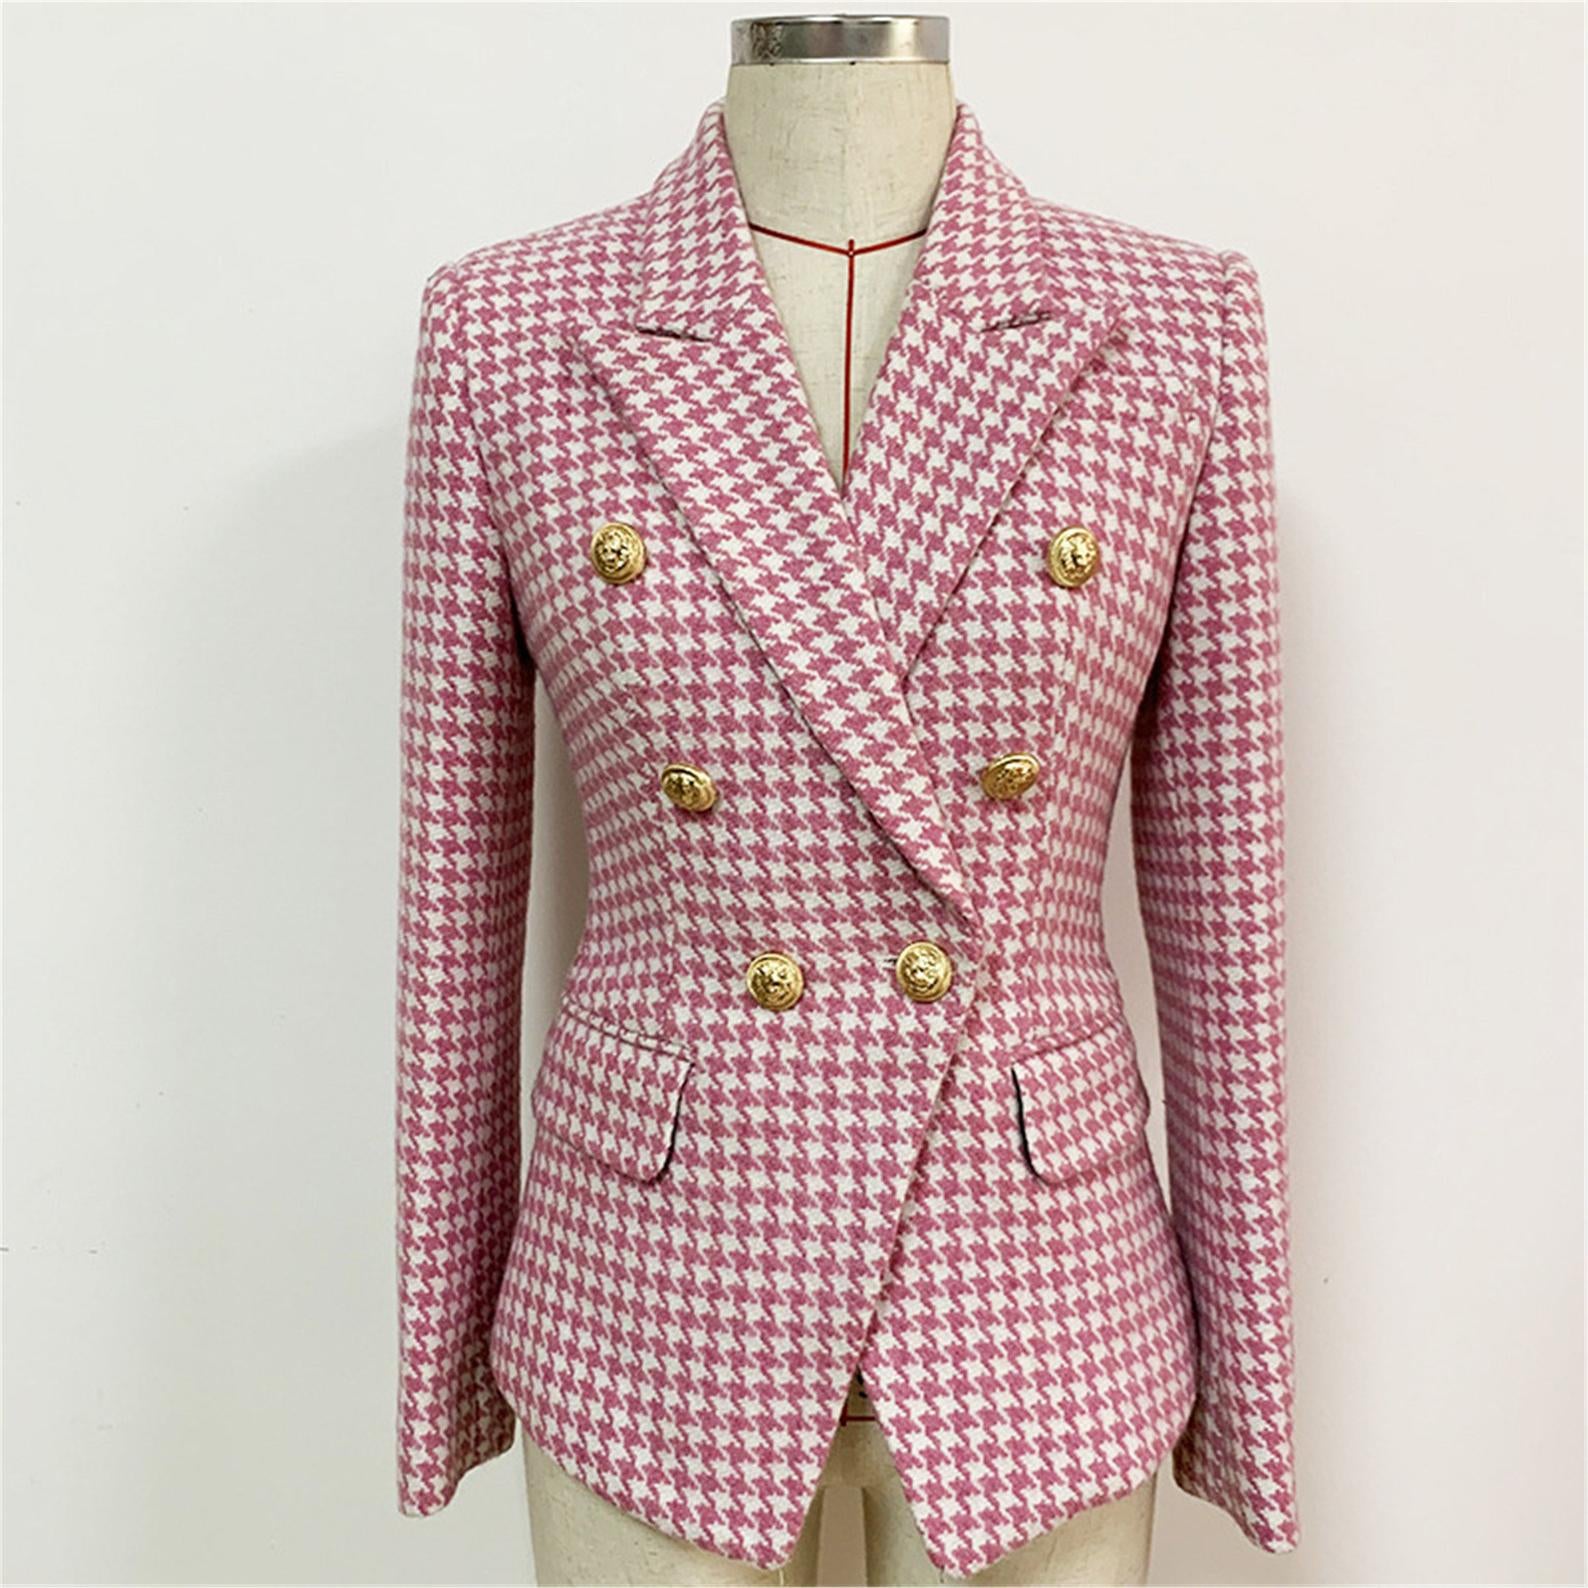  Women's Designer Inspired Pink Checked Fitted Blazer Coat  UK CUSTOMER SERVICE!   Women's Designer Inspired Pink Checked Fitted Blazer Coat -This pink and white  checked blazer proves that power suiting can also be pretty. It's made from houndsooth cotton-blend tweed with a full lining for a comfortable feel. Padded shoulders and crest buttons add a sharp tailoring note. Dry Cleaning. Fully lined